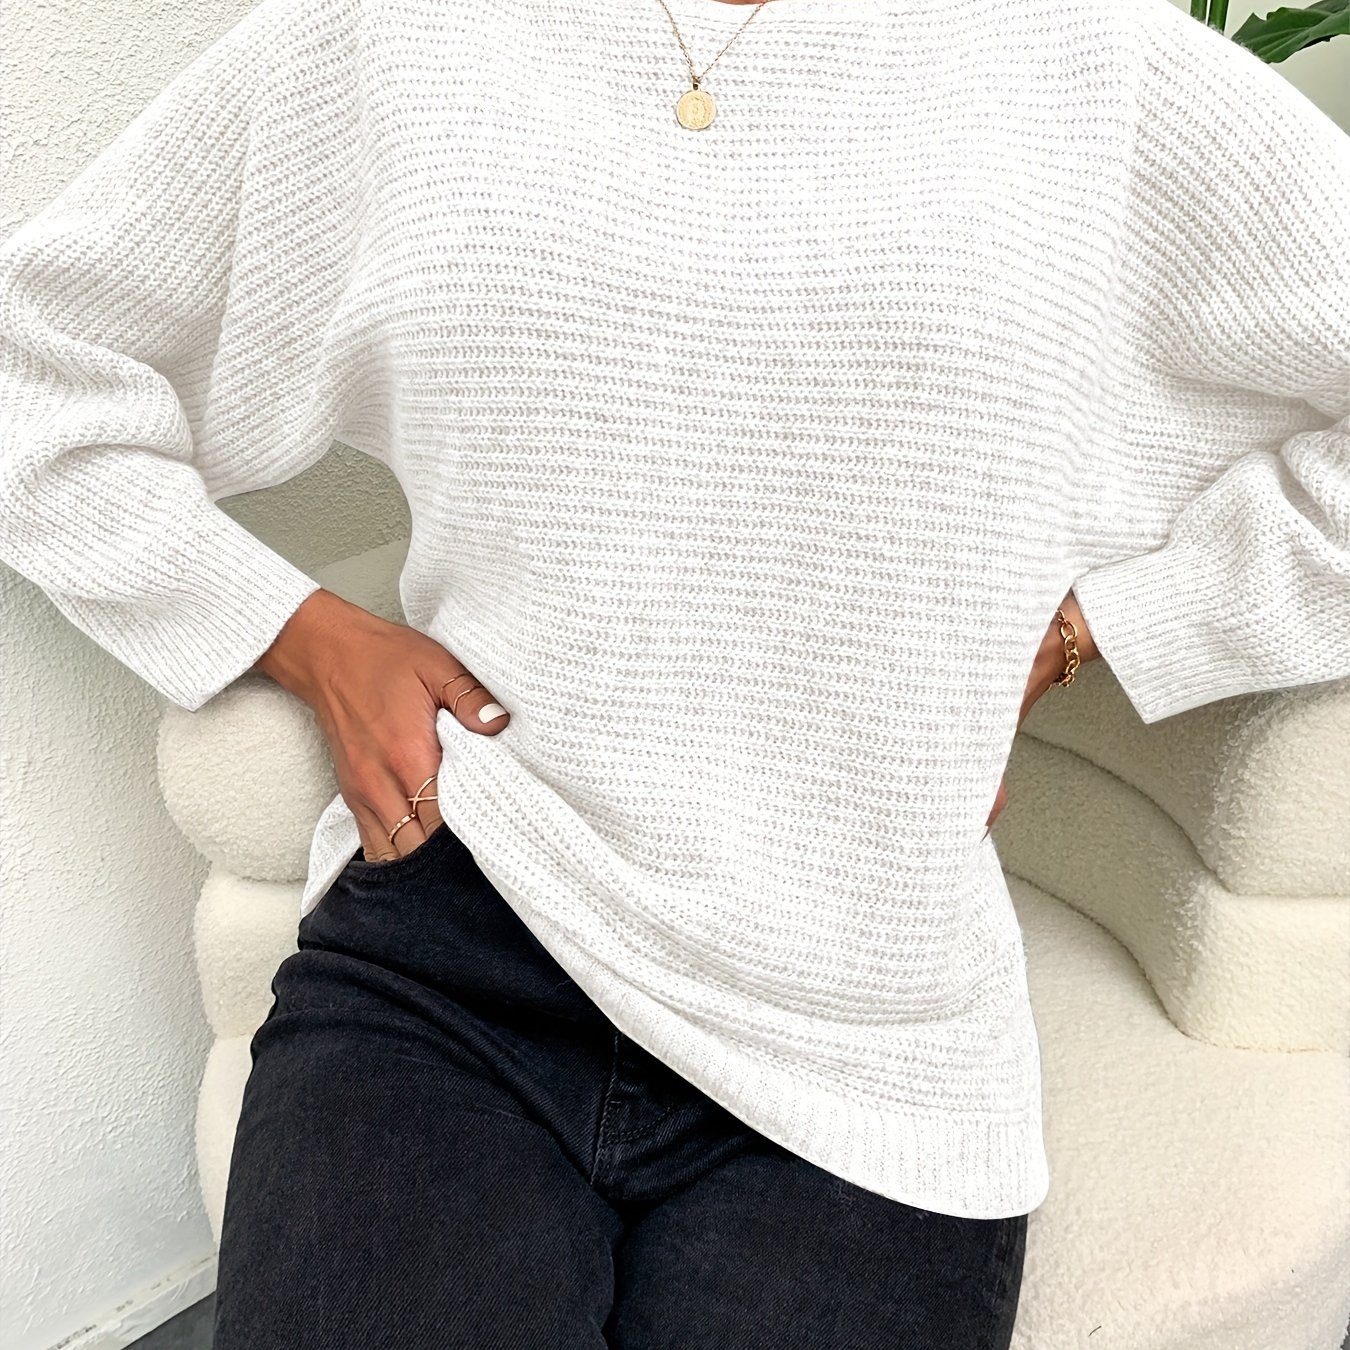 solid boat neck knit bat sleeve sweater casual long sleeve versatile sweater womens clothing